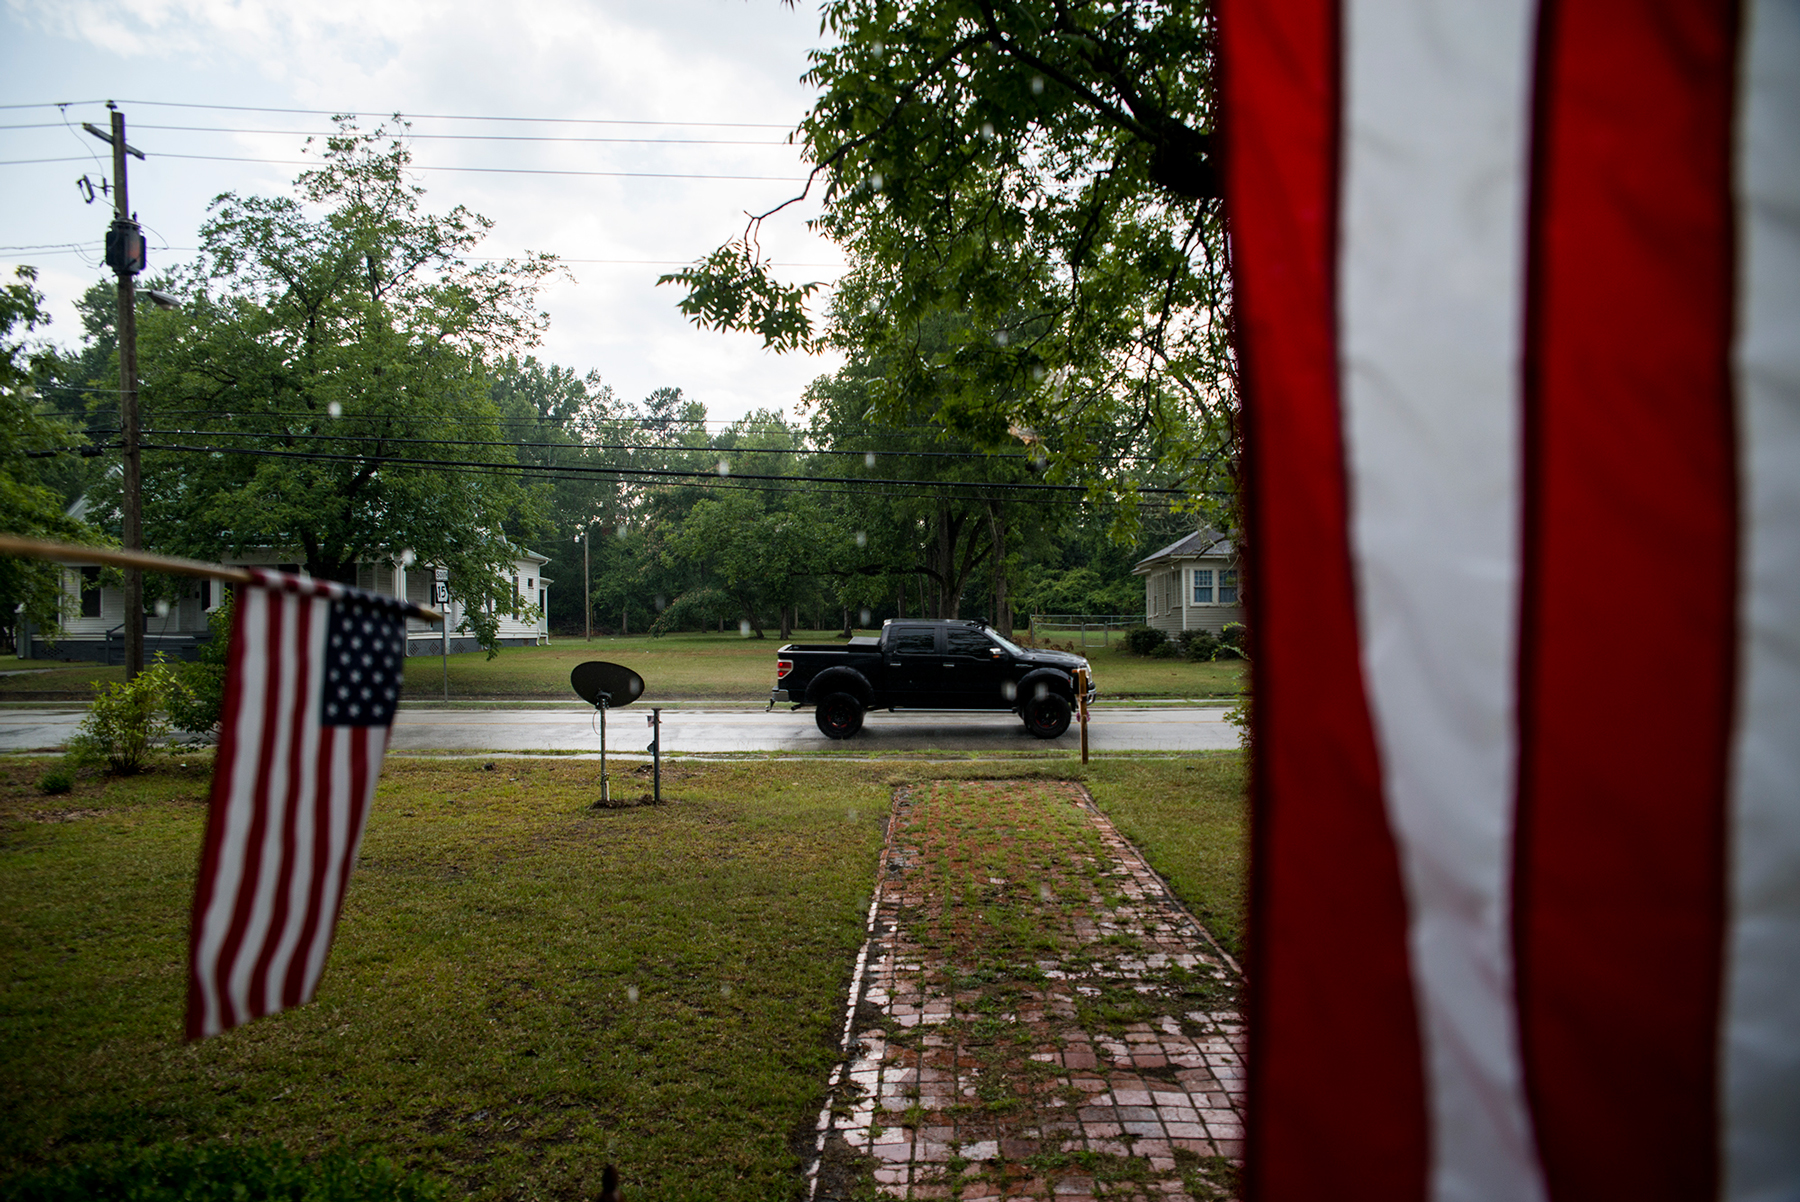 Residents in Sparta, Georgia, display American flags from their front porch on July 3. The Center for American Progress Action Fund gives Georgia low marks for ballot accessibility. (Roman Knertser/News21)